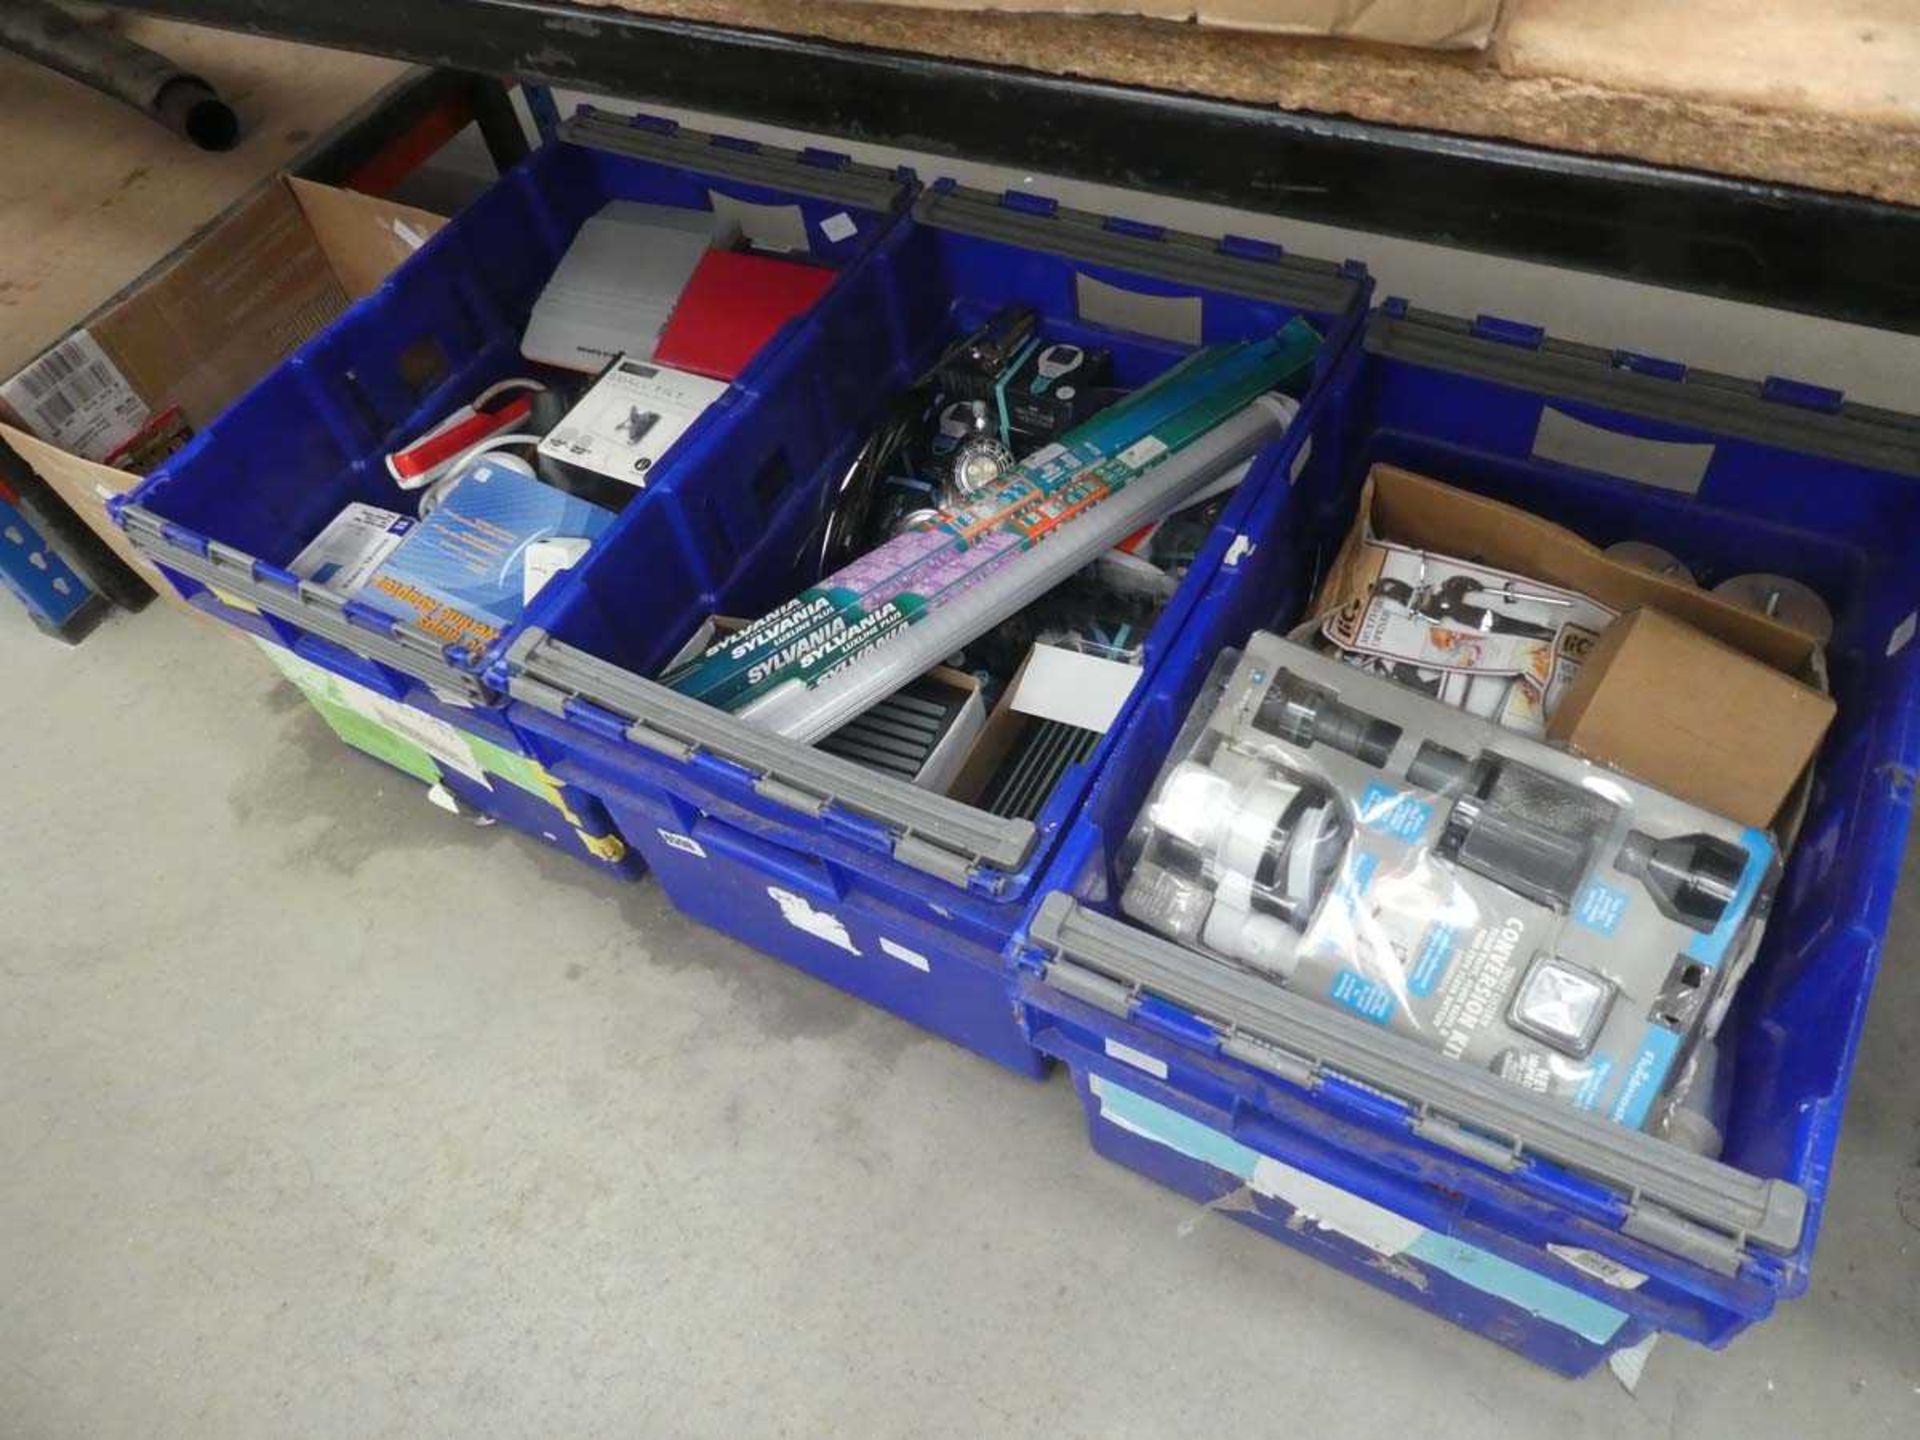 4 boxes of assorted items including bulbs, locks, lights, toilet conversion kits etc